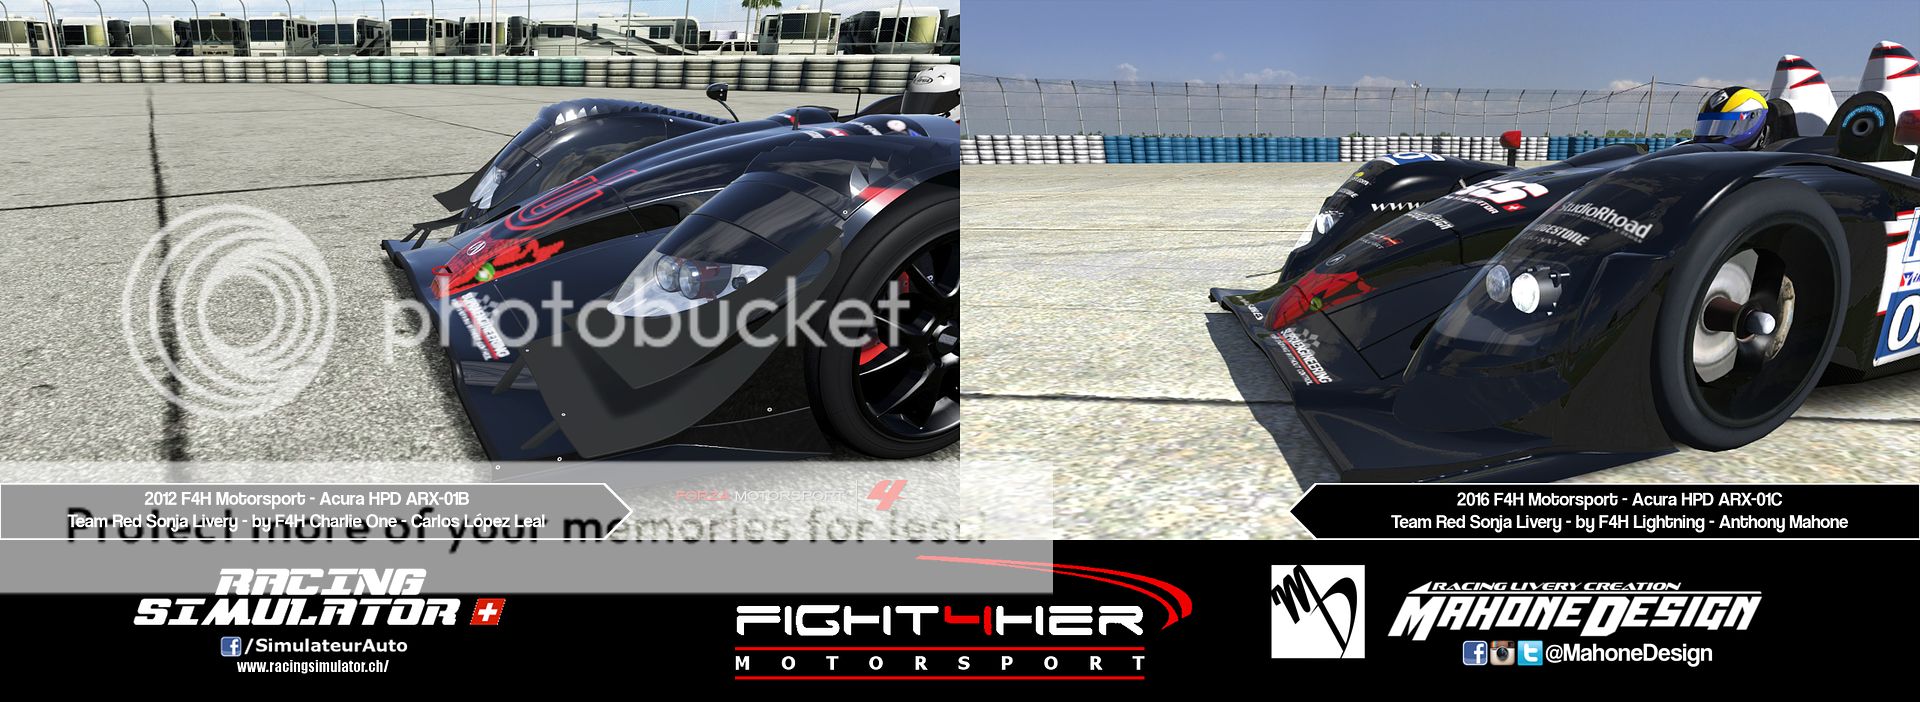 MahoneDesign - Racecar Livery Creation F4H%20Red%20Sonja%20Nose